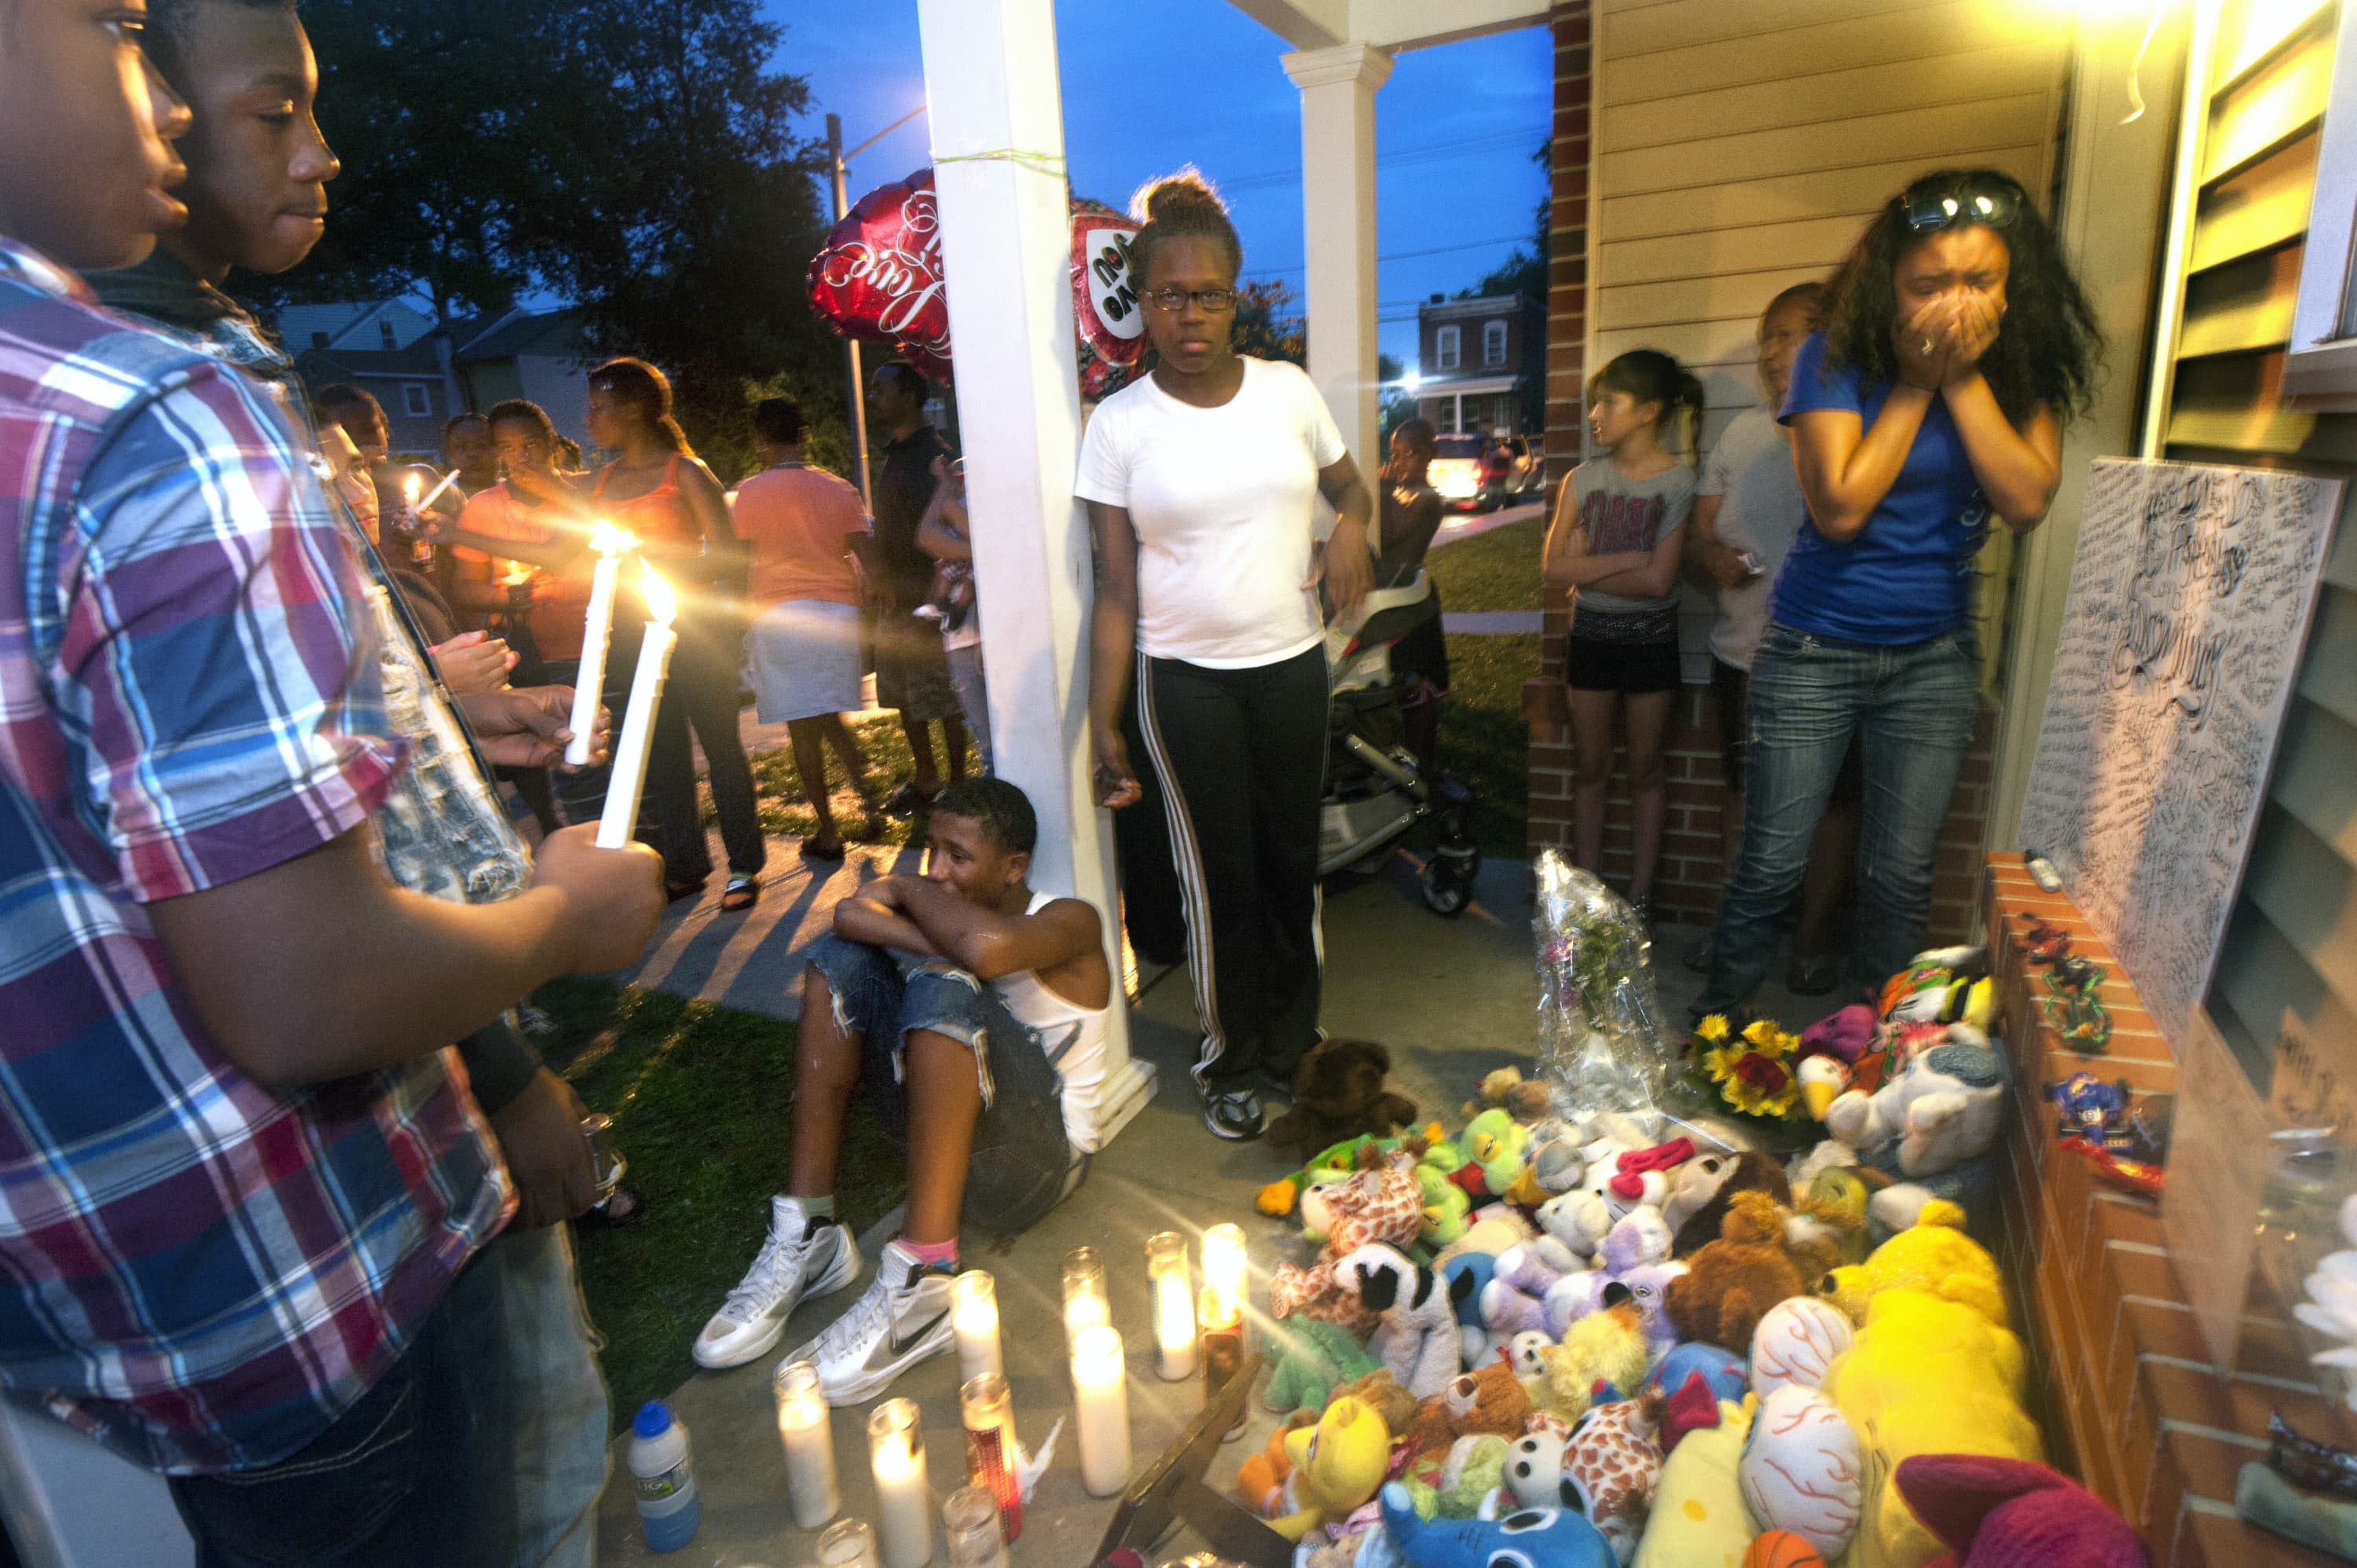 Friends and family members react to the murder of five-year old Dominick Andujar at a vigil on the dead boy's doorstep on Sept. 5, 2012. (Photo by April Saul)